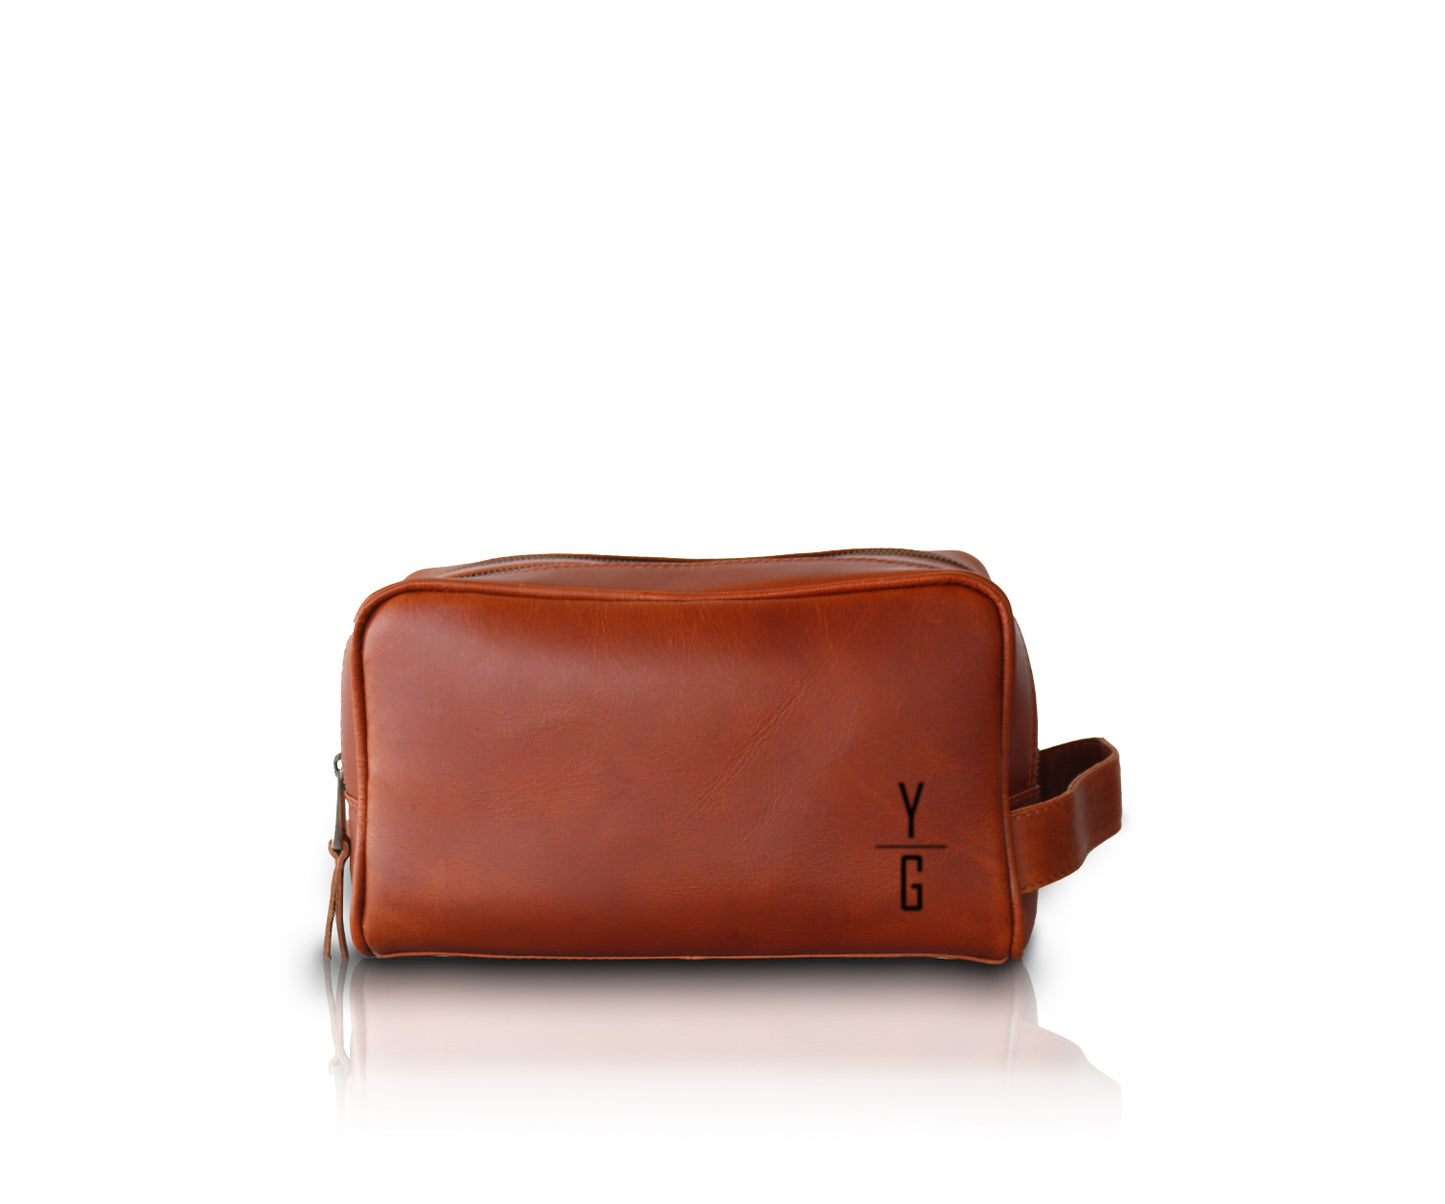 Leather Double Section Toiletry Bag | Dark Brown